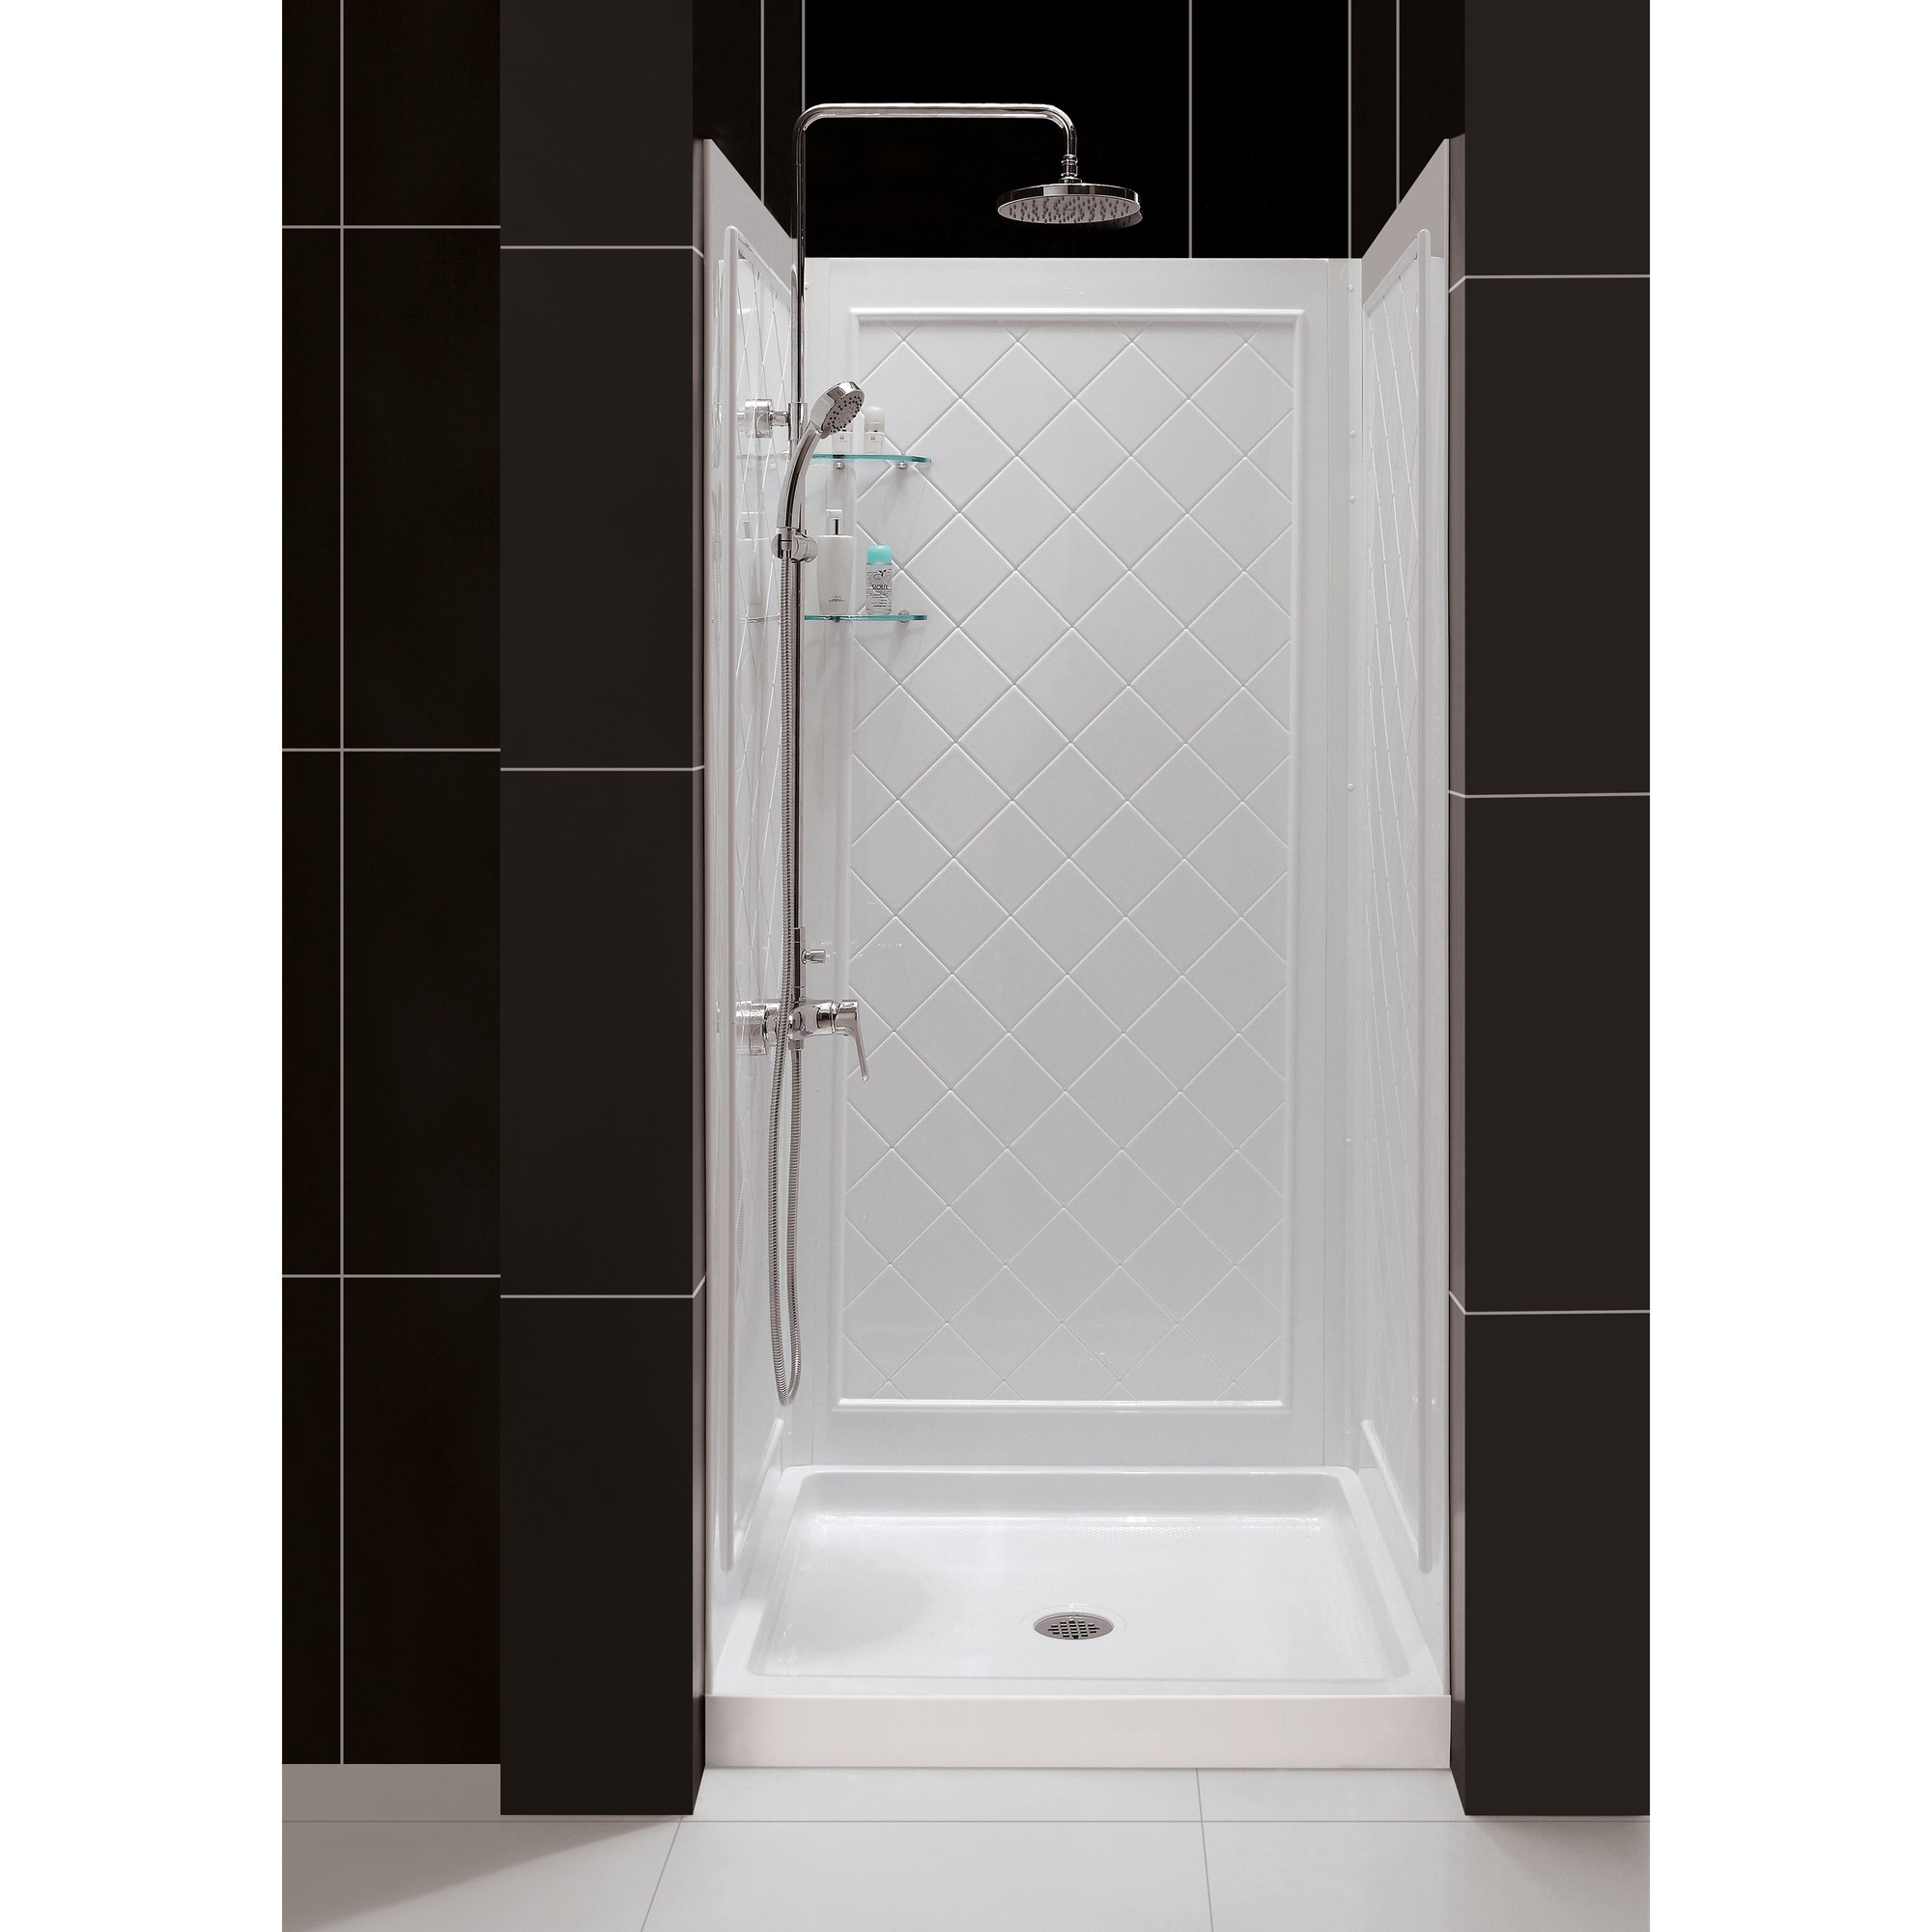 DreamLine 36 in. D x 48 in. W x 76 3/4 in. H Center Drain Acrylic Shower Base and QWALL-5 Backwall Kit In White